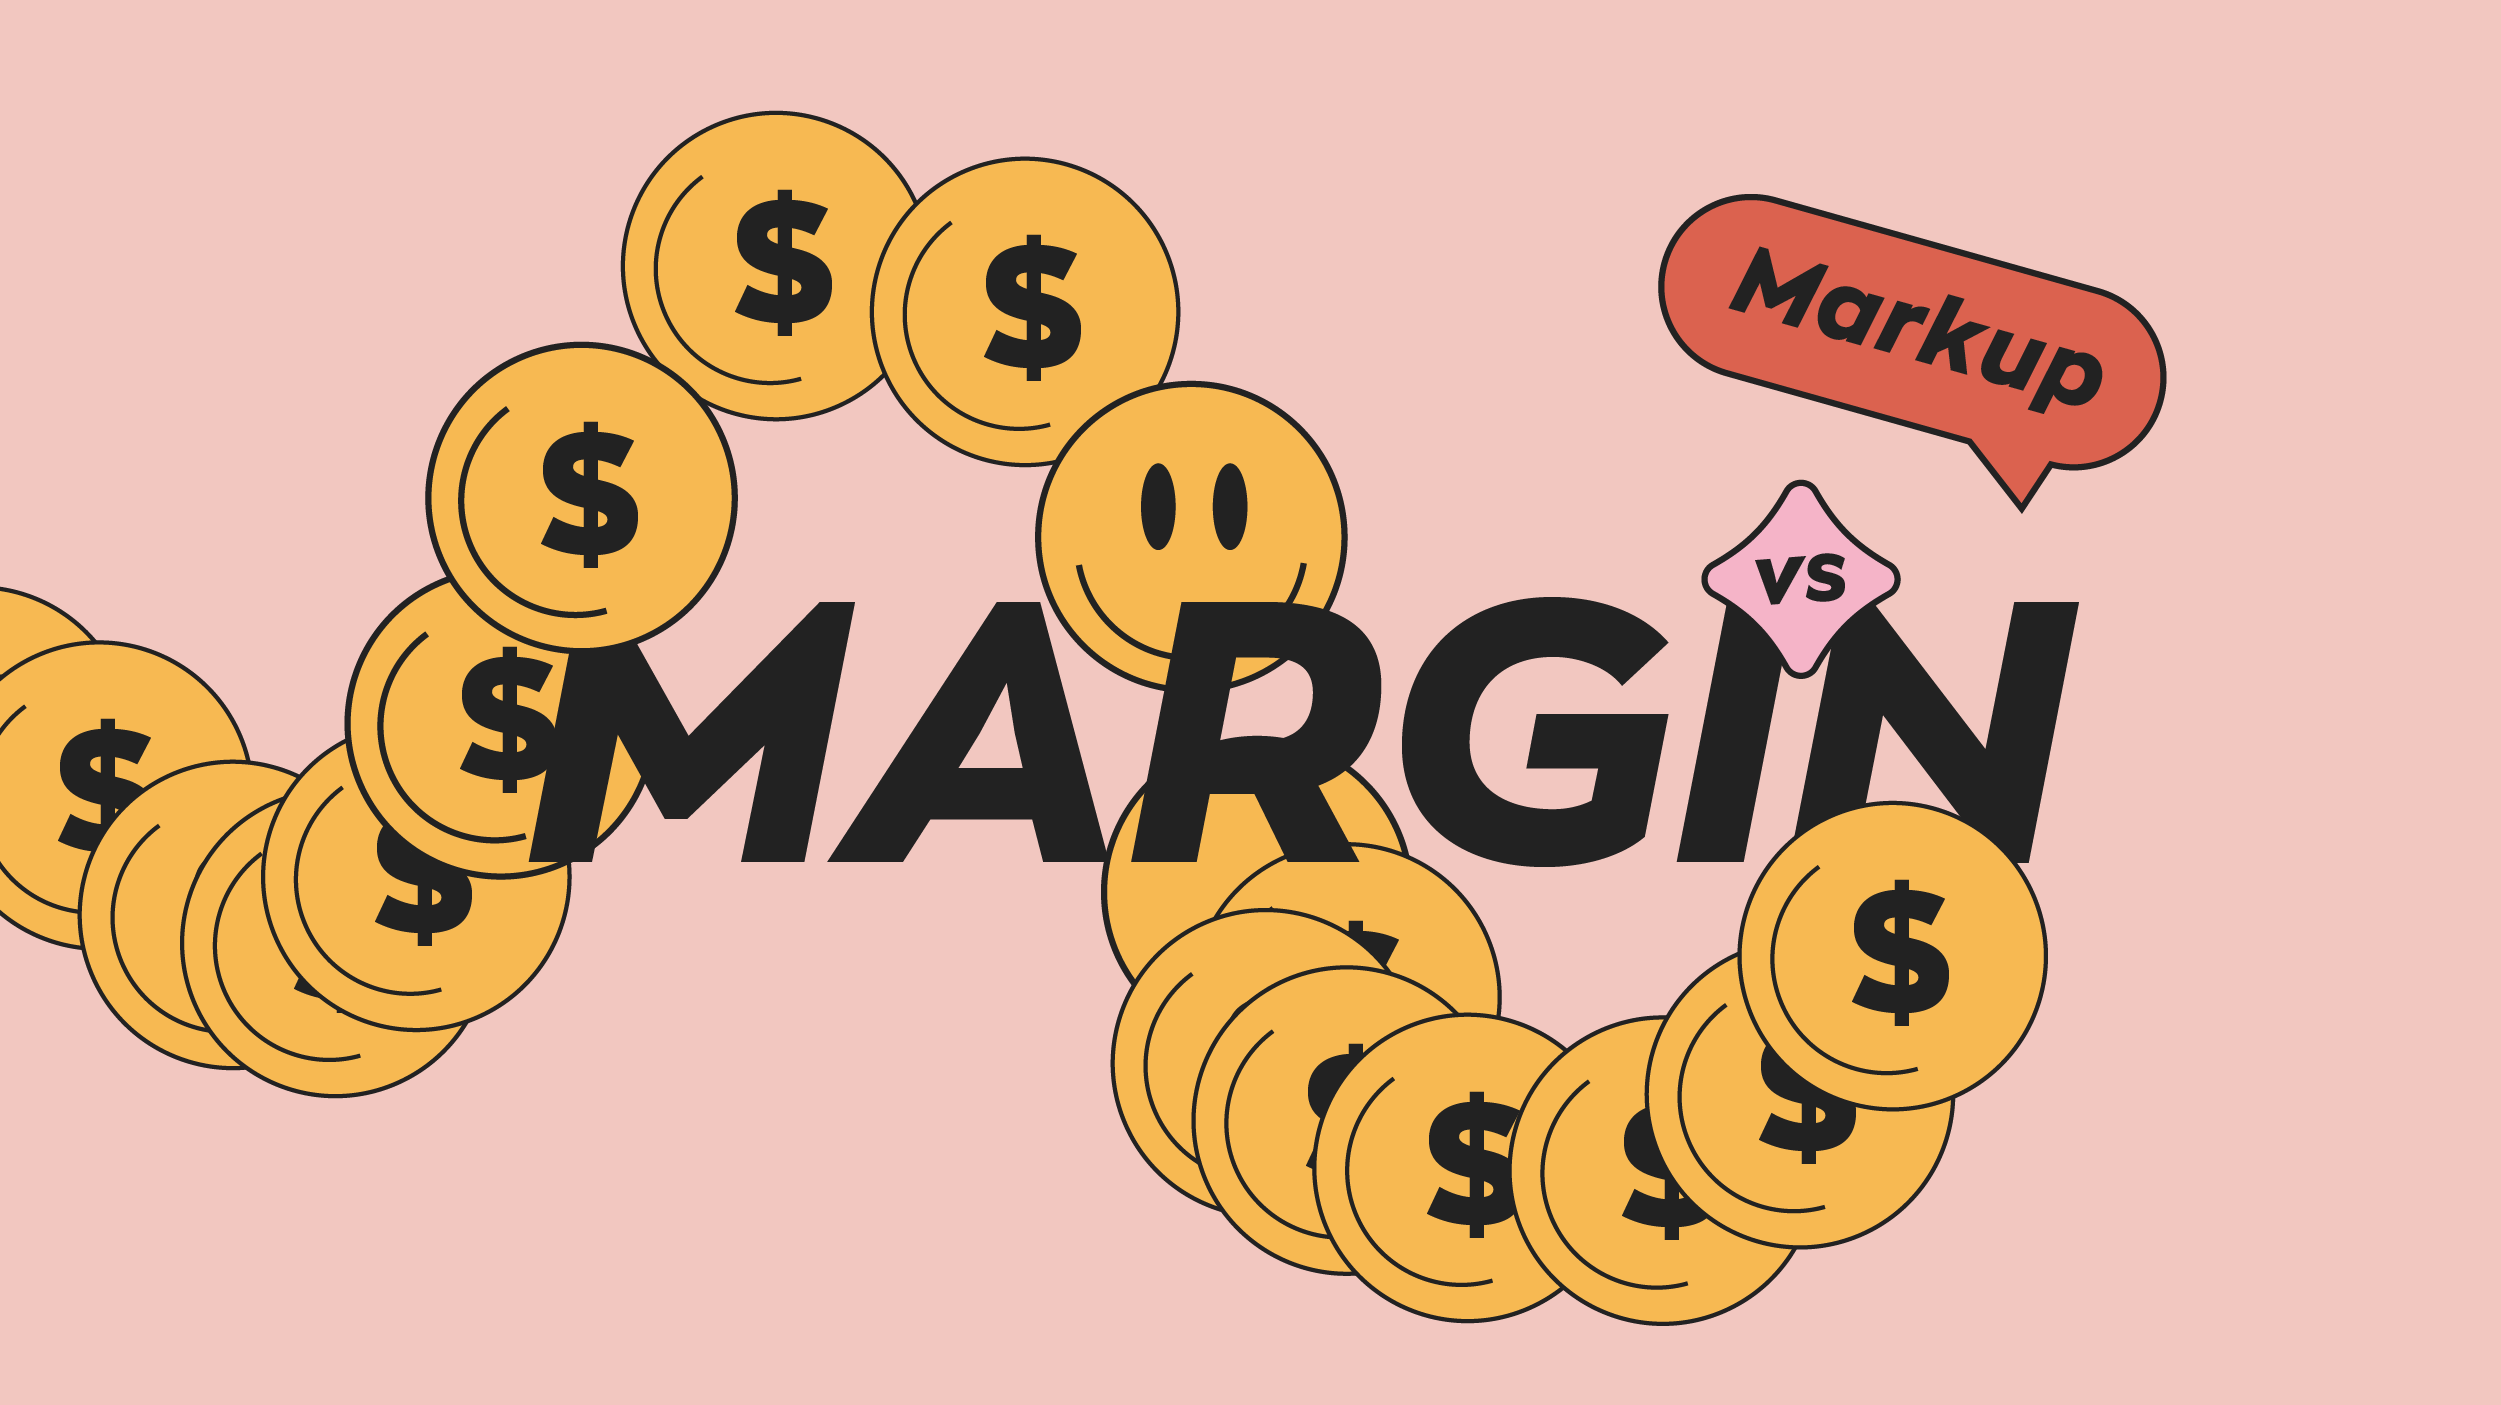 Is The Marginal Service worth your time? Find out here